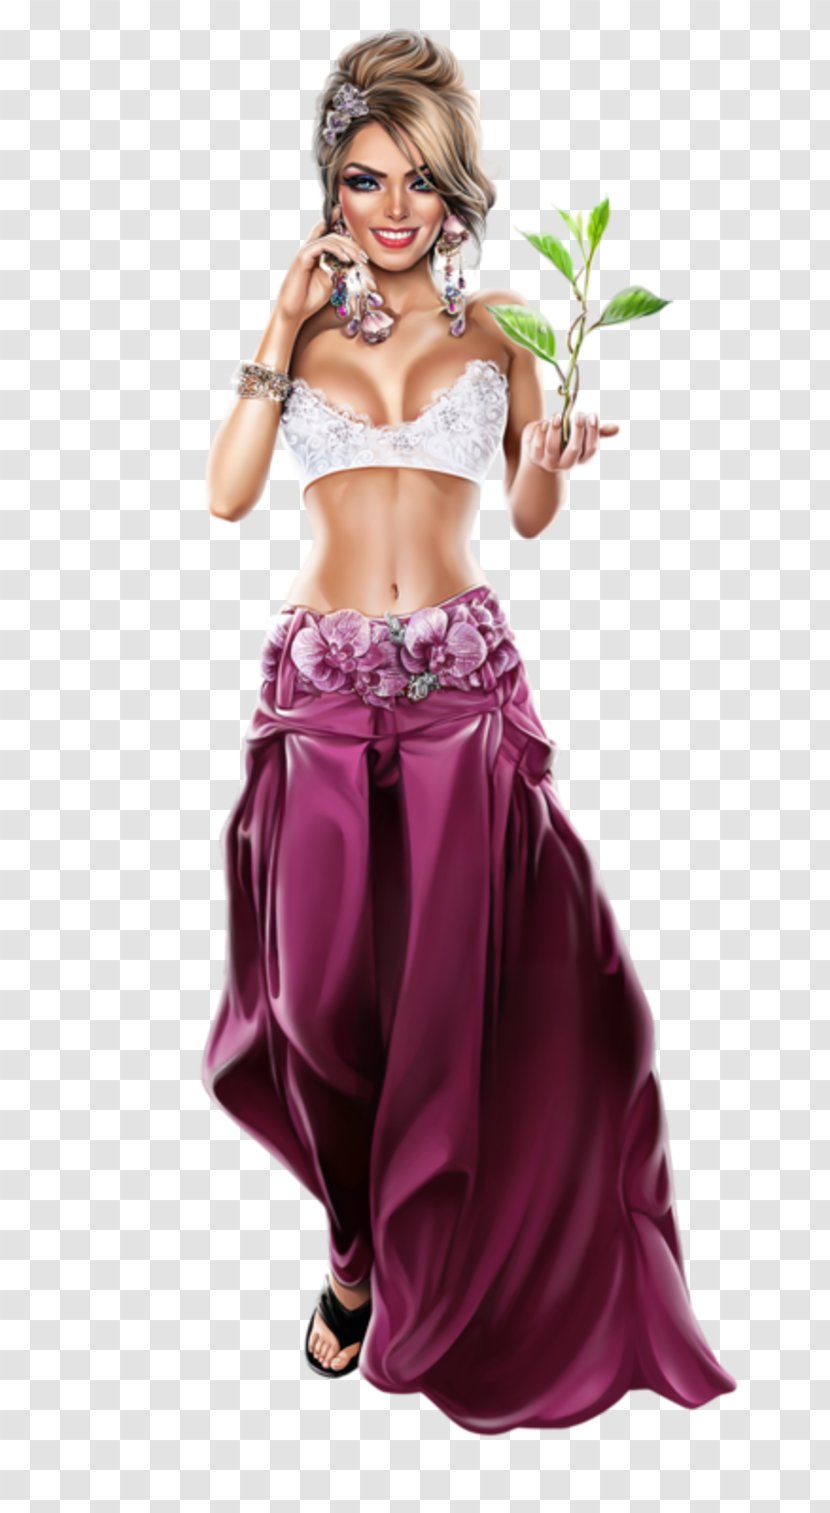 Woman Diary Female Costume - Frame Transparent PNG